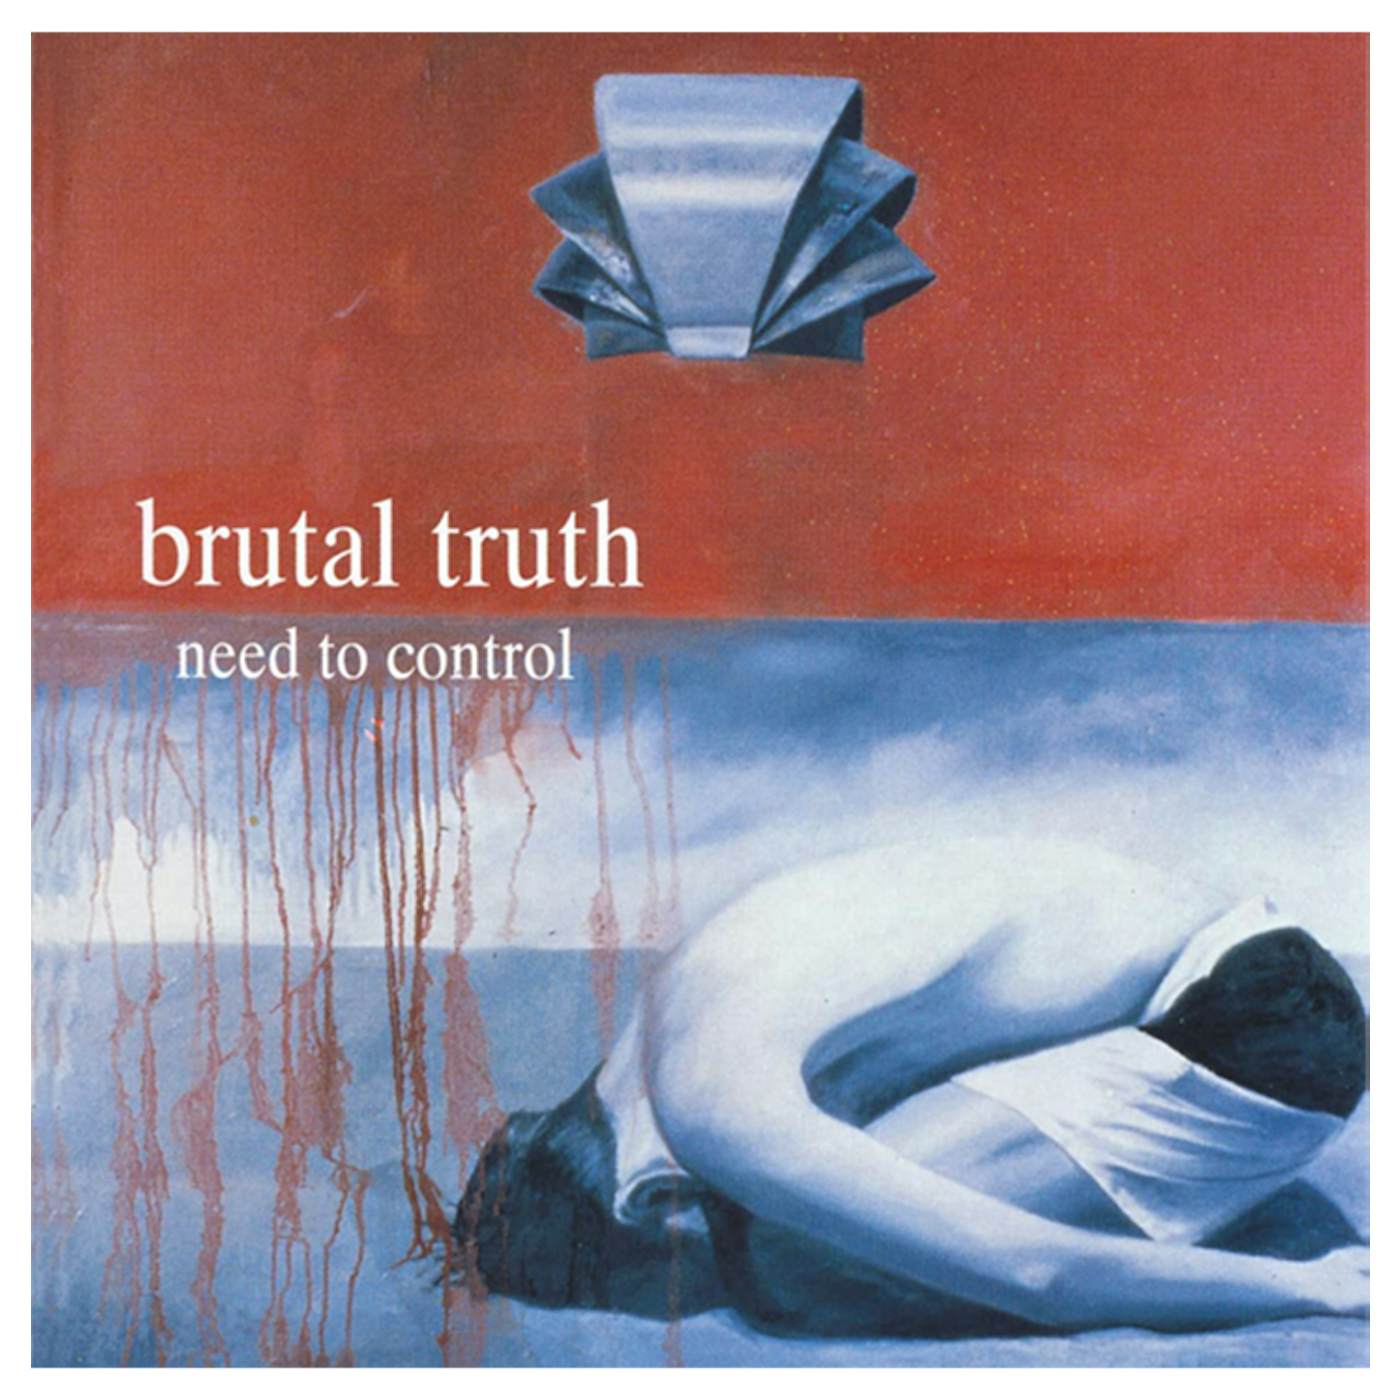 BRUTAL TRUTH - 'Need To Control' DigiCD